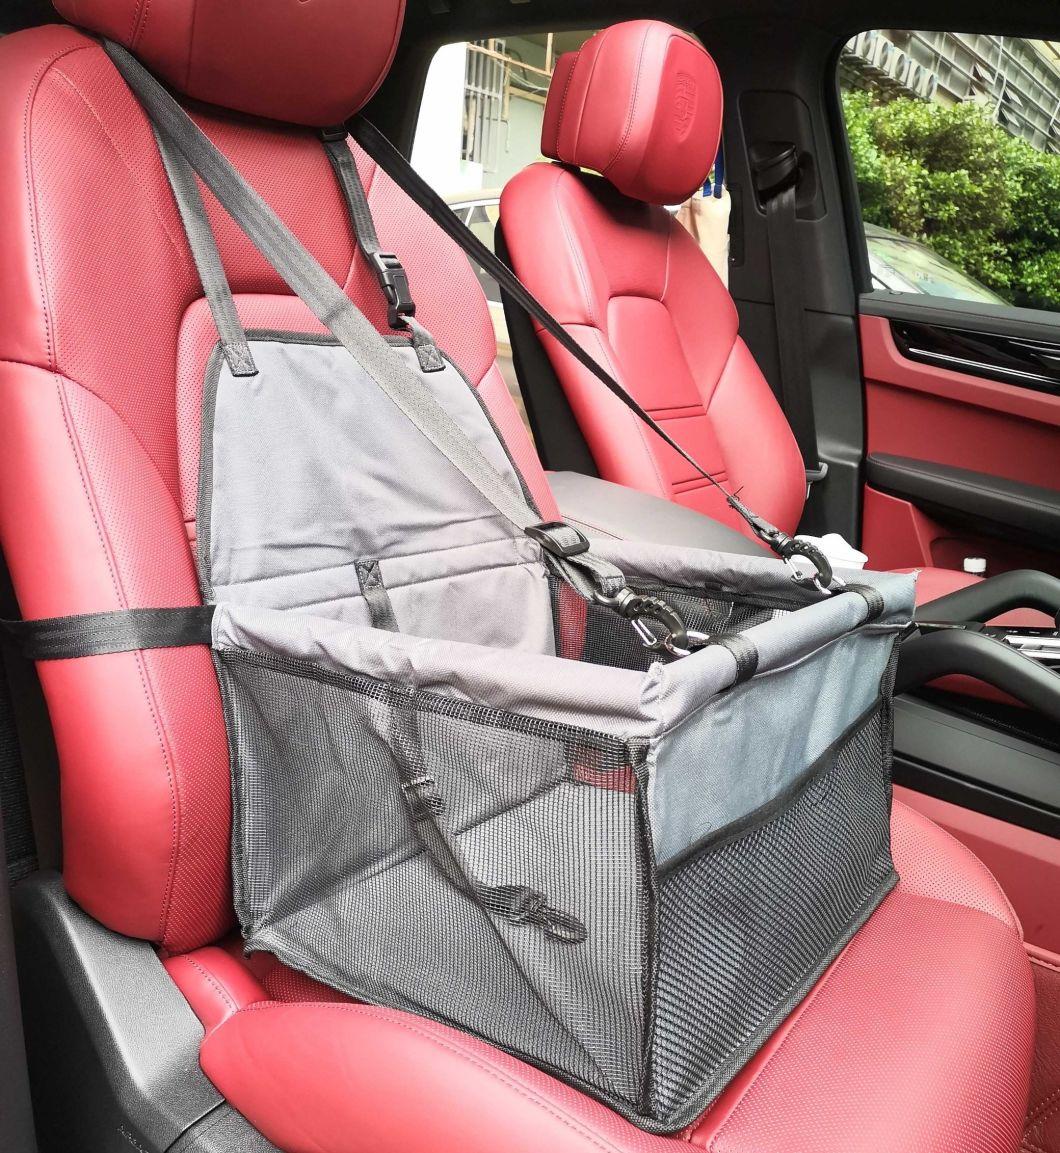 Pet Dogs Cats Car Booster Seat Durable Portable and Breathable Bag Waterproof Car Seat Suitable for Small and Medium Pet